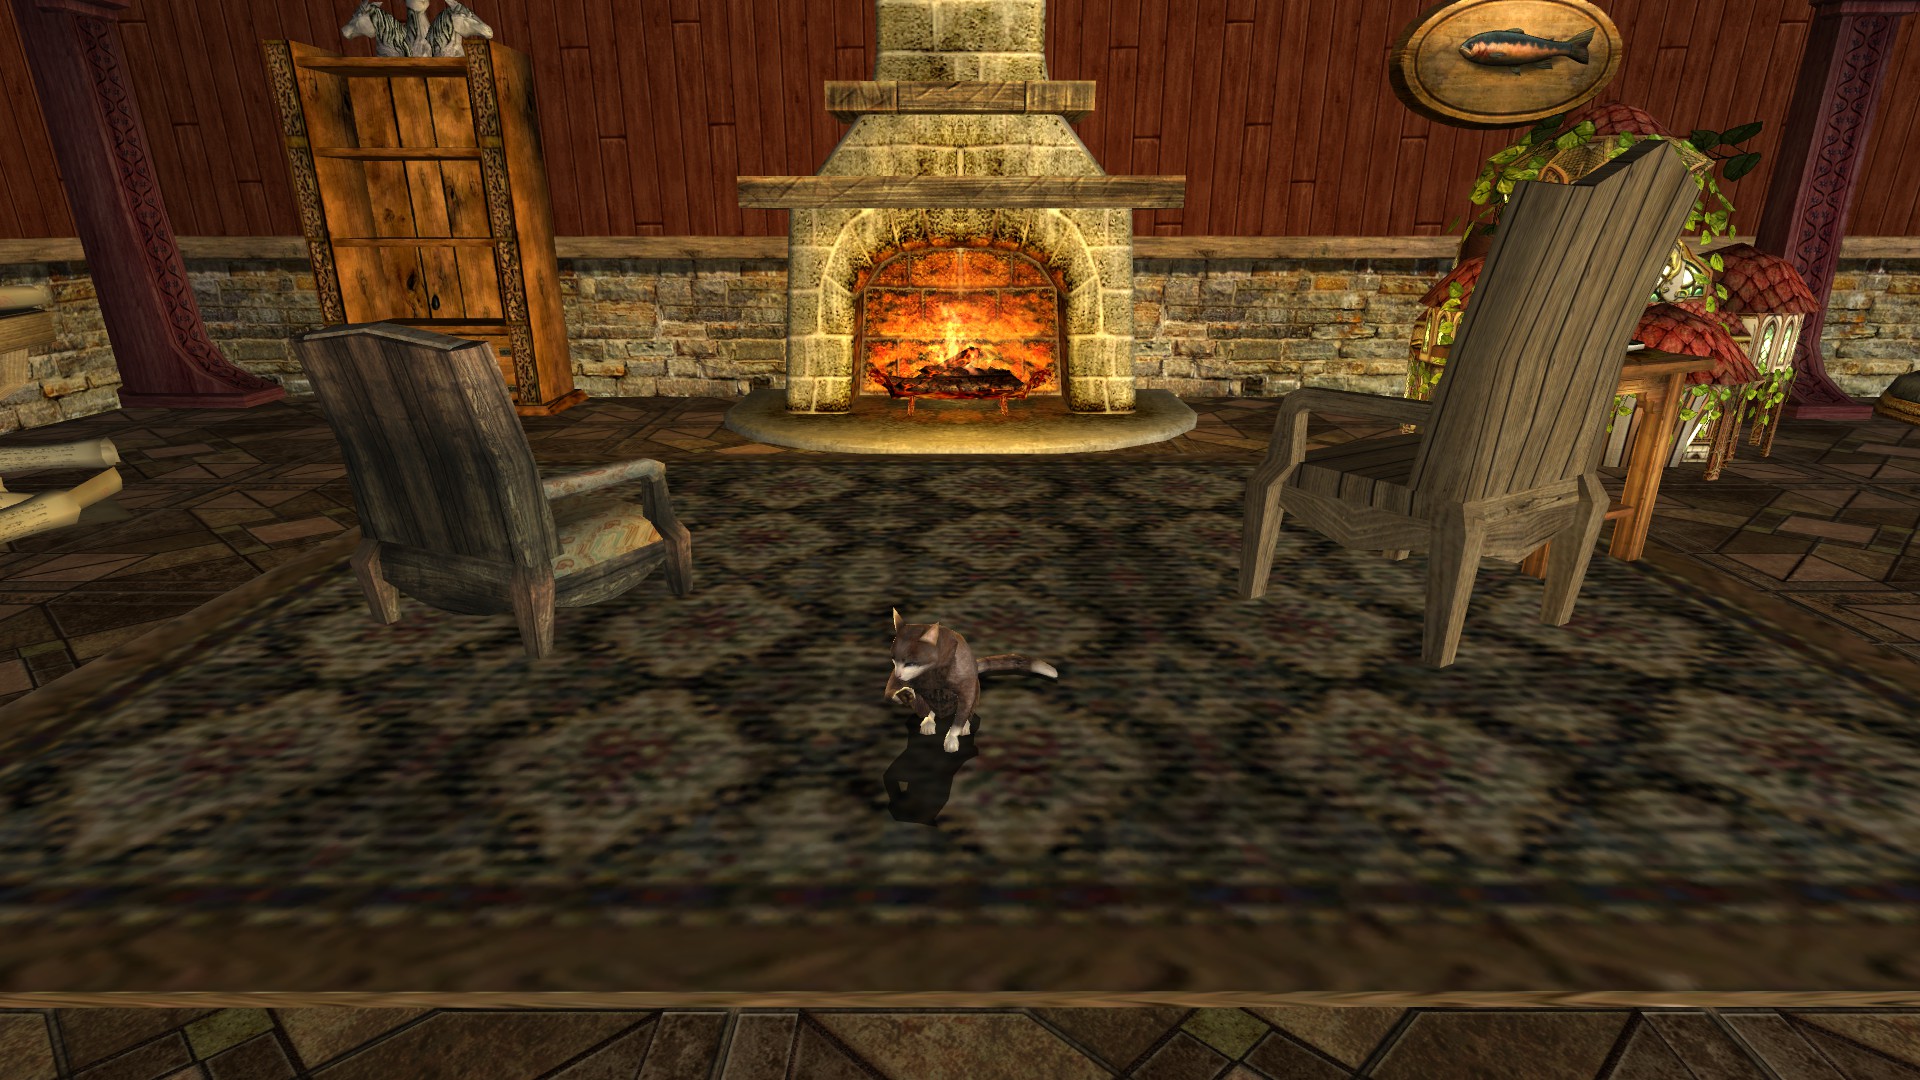 Lord of the Rings Online, hobbit deluxe house, cat on rug